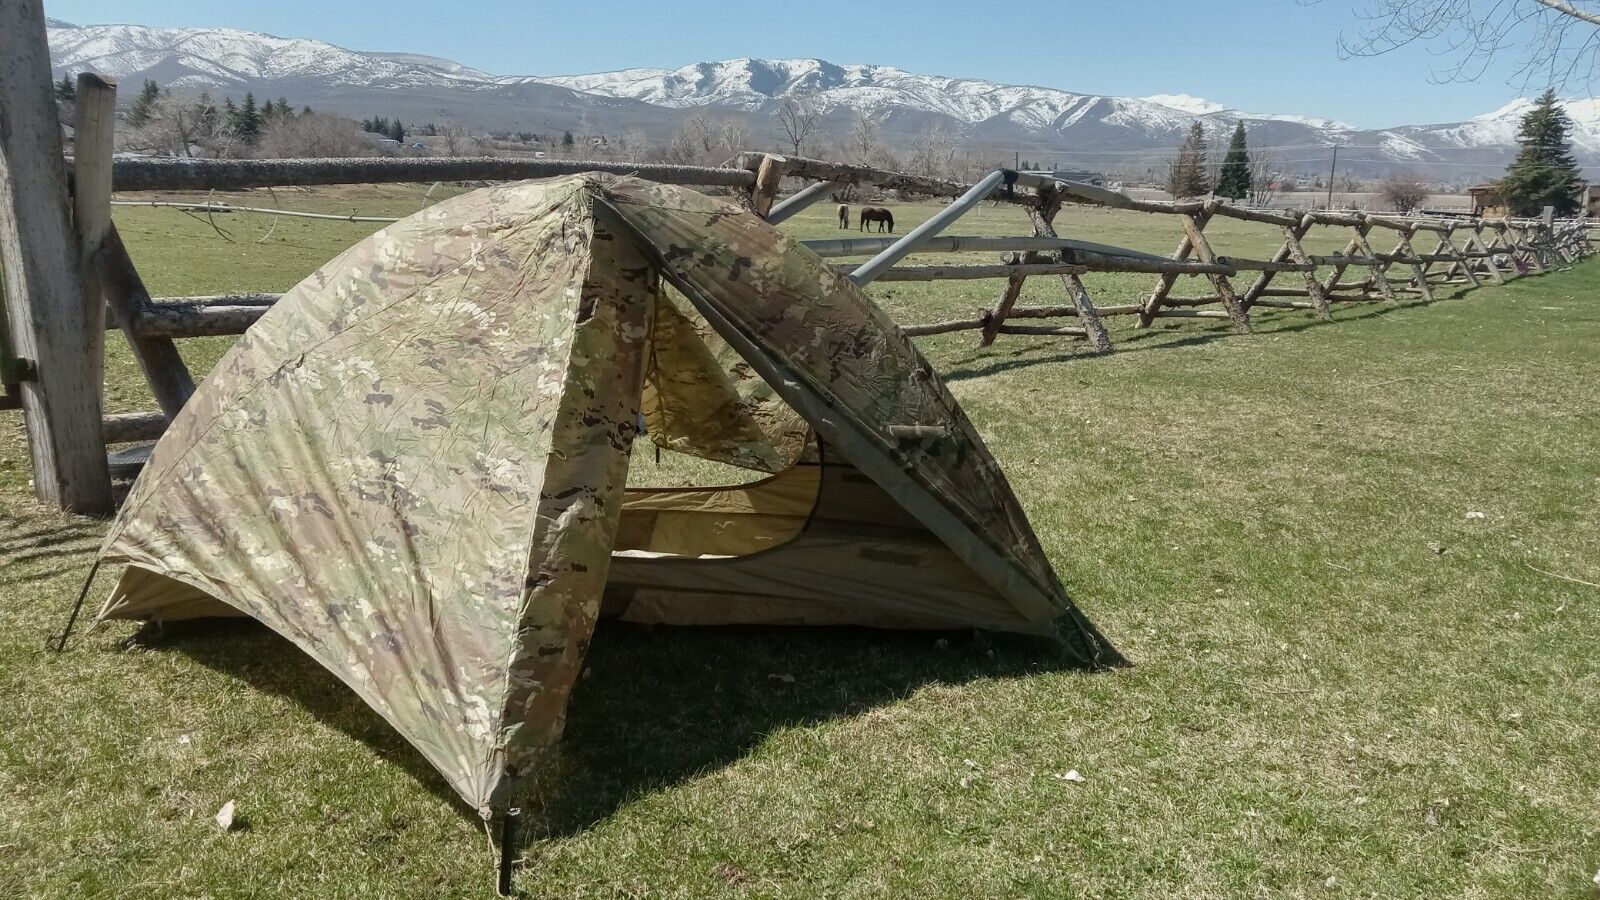 Litefighter 1 Multicam Combat Shelter System One-Person Tent